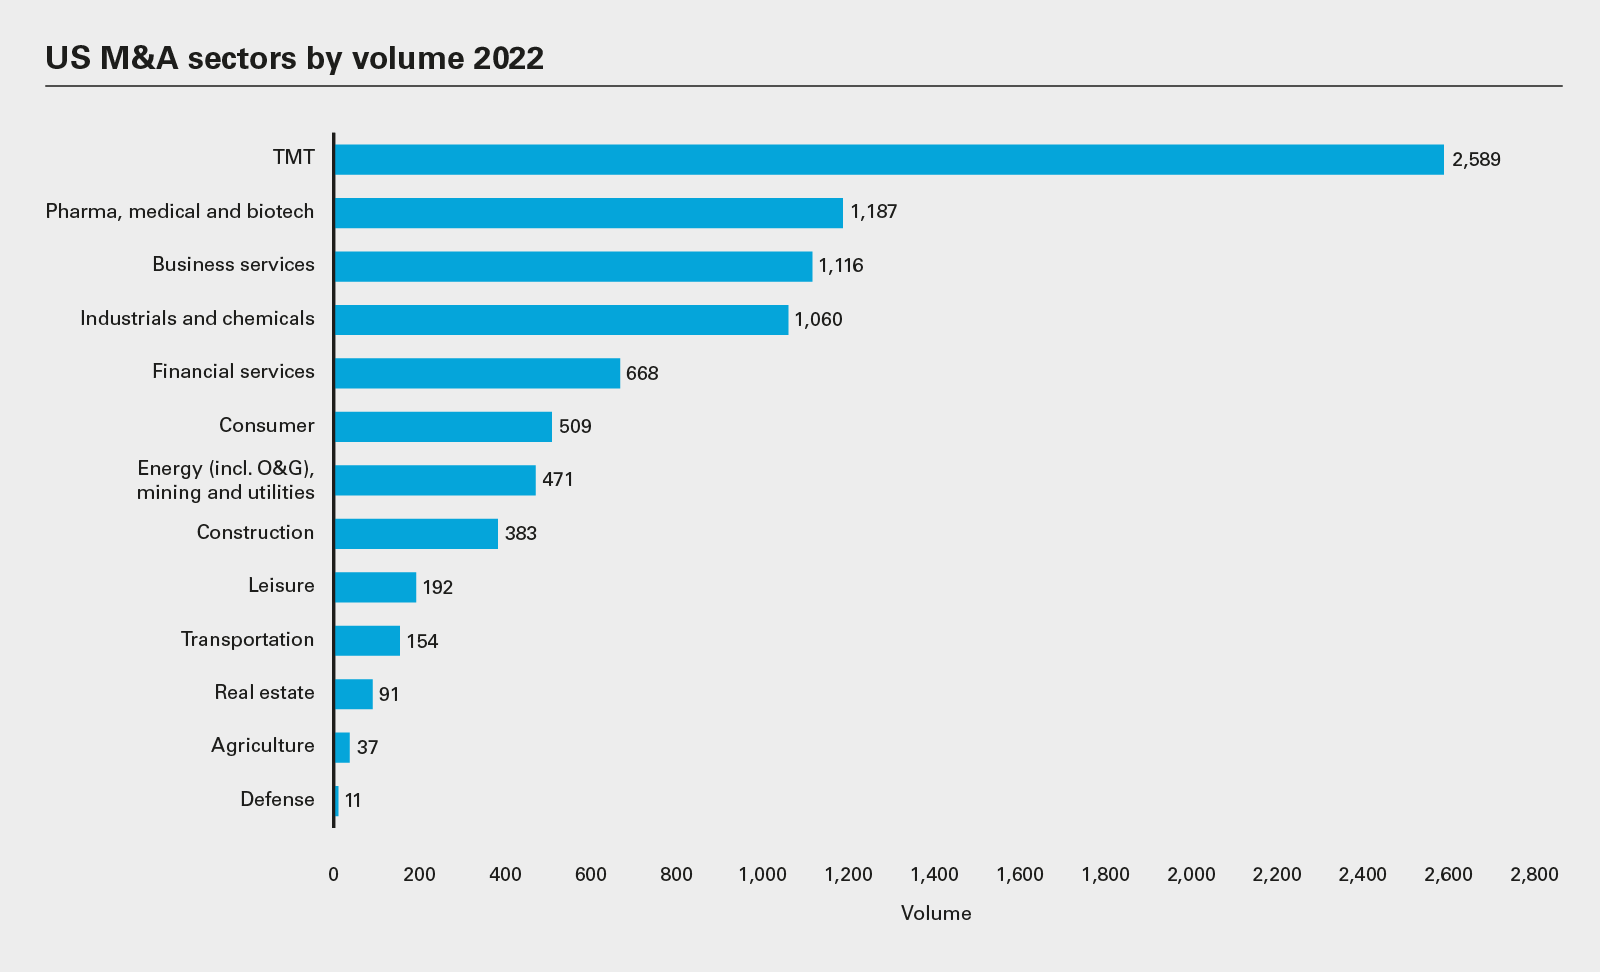 US M&A sectors by volume 2022 